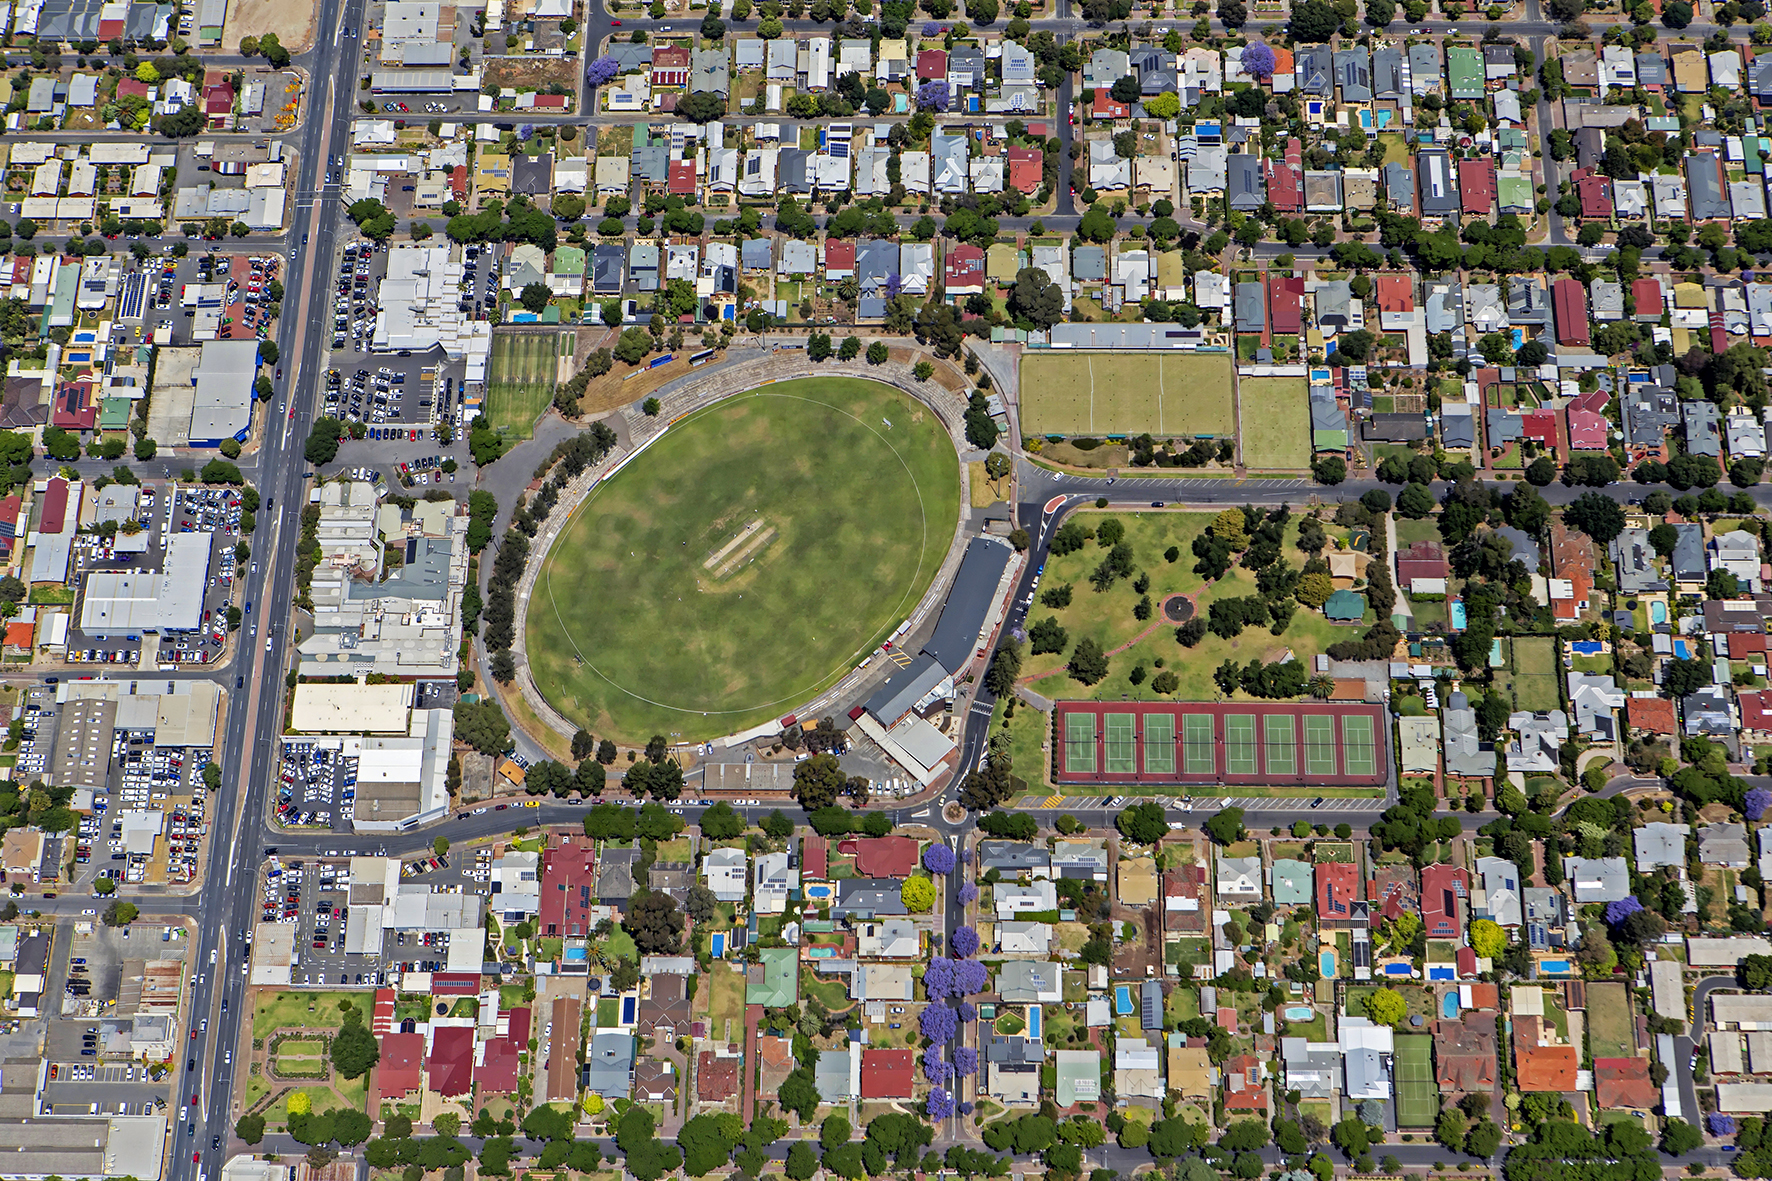 Aerial image of Prospect Oval, Prospect Tennis Club, Prospect Memorial Gardens and surrounding area.